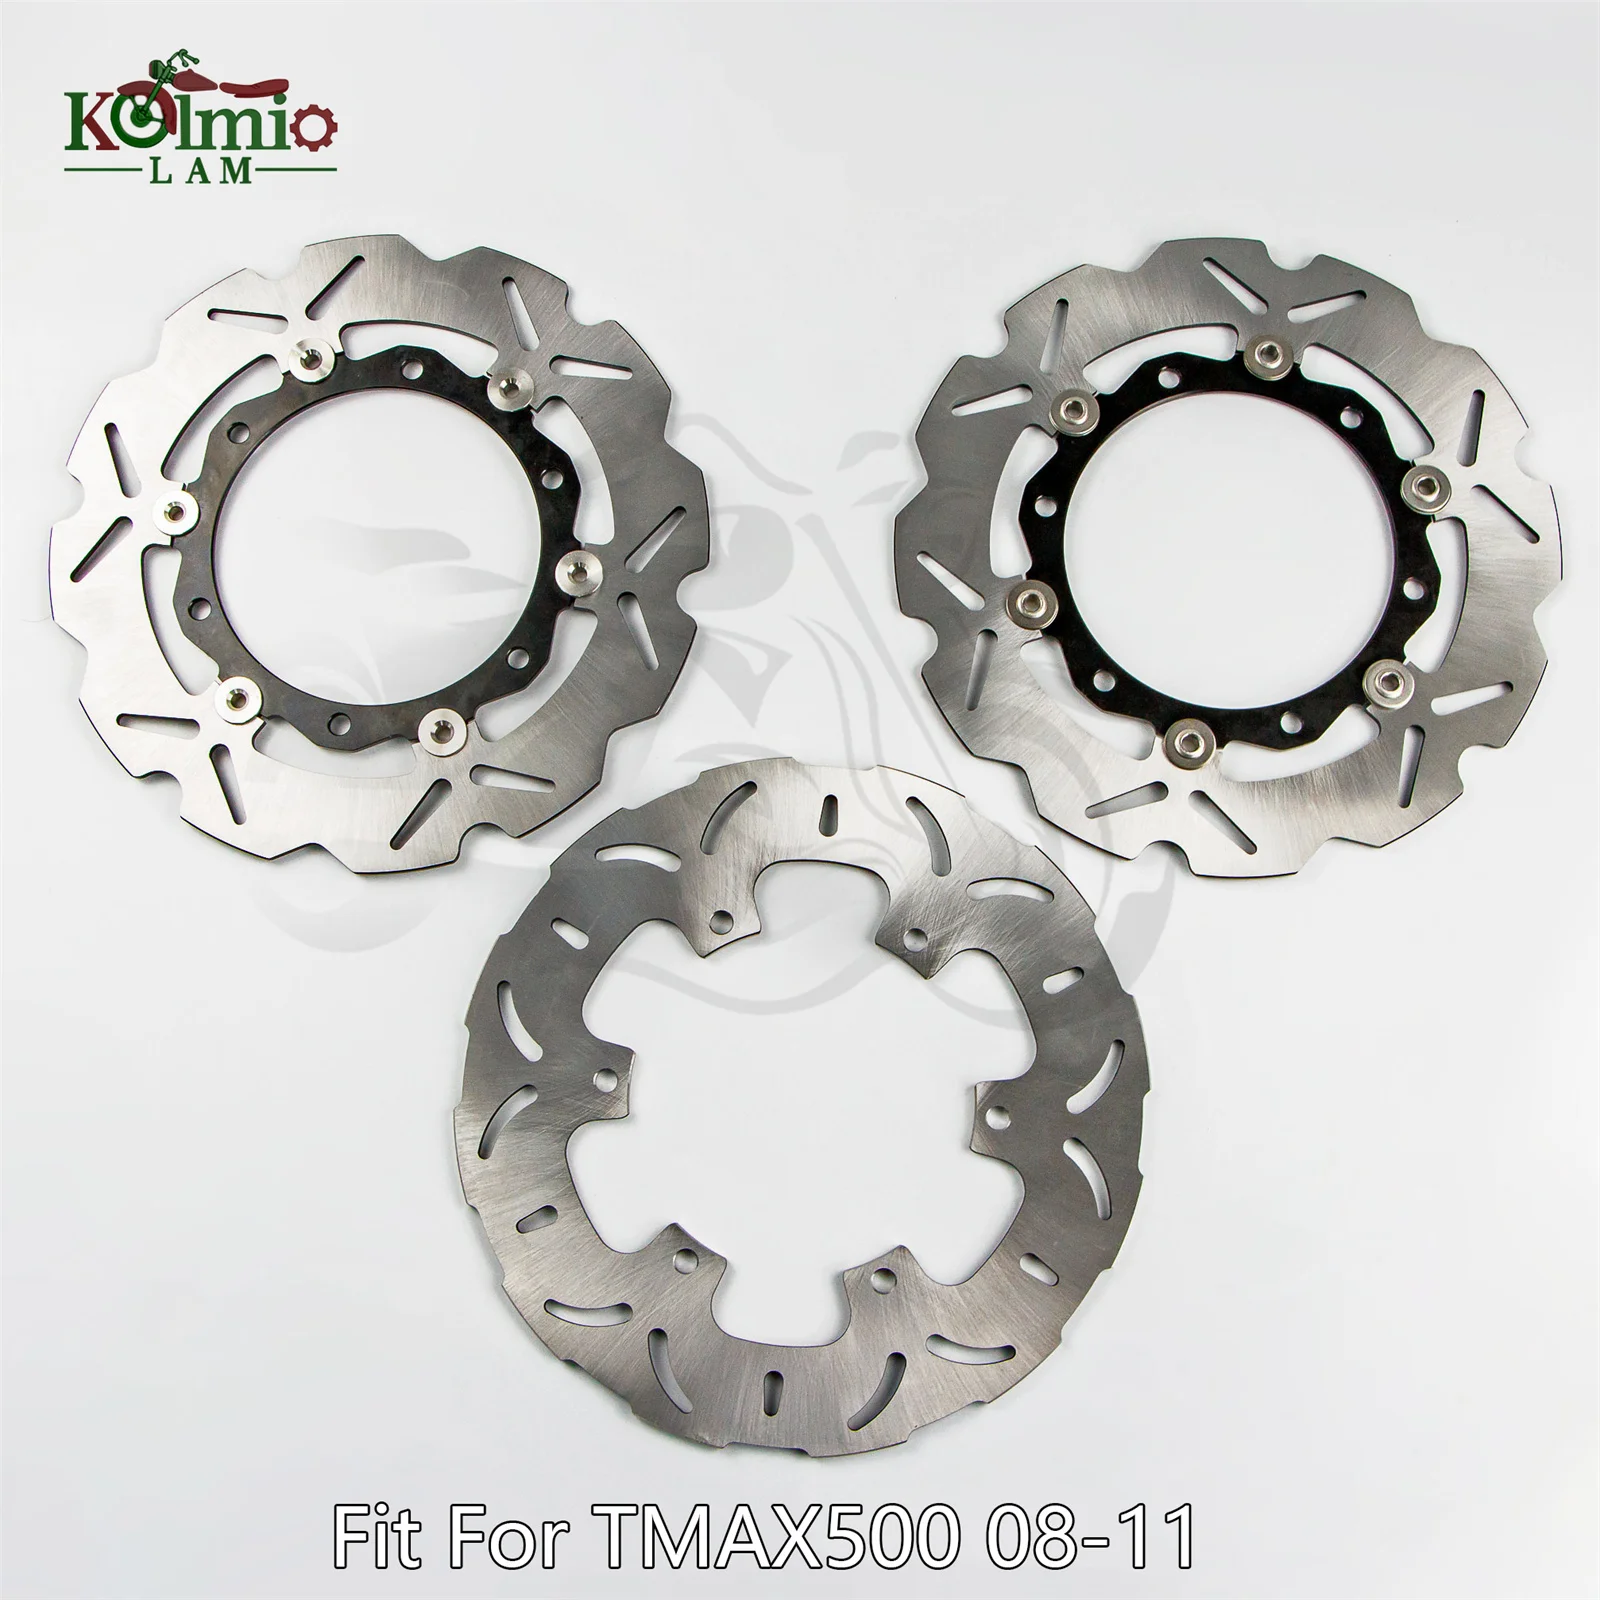 

Fit for 2008 - 2011 YAMAHA TMAX500 T-MAX500 Motorcycle Front Rear Brake Disc Rotor XP500 TMAX 500 2009 2010